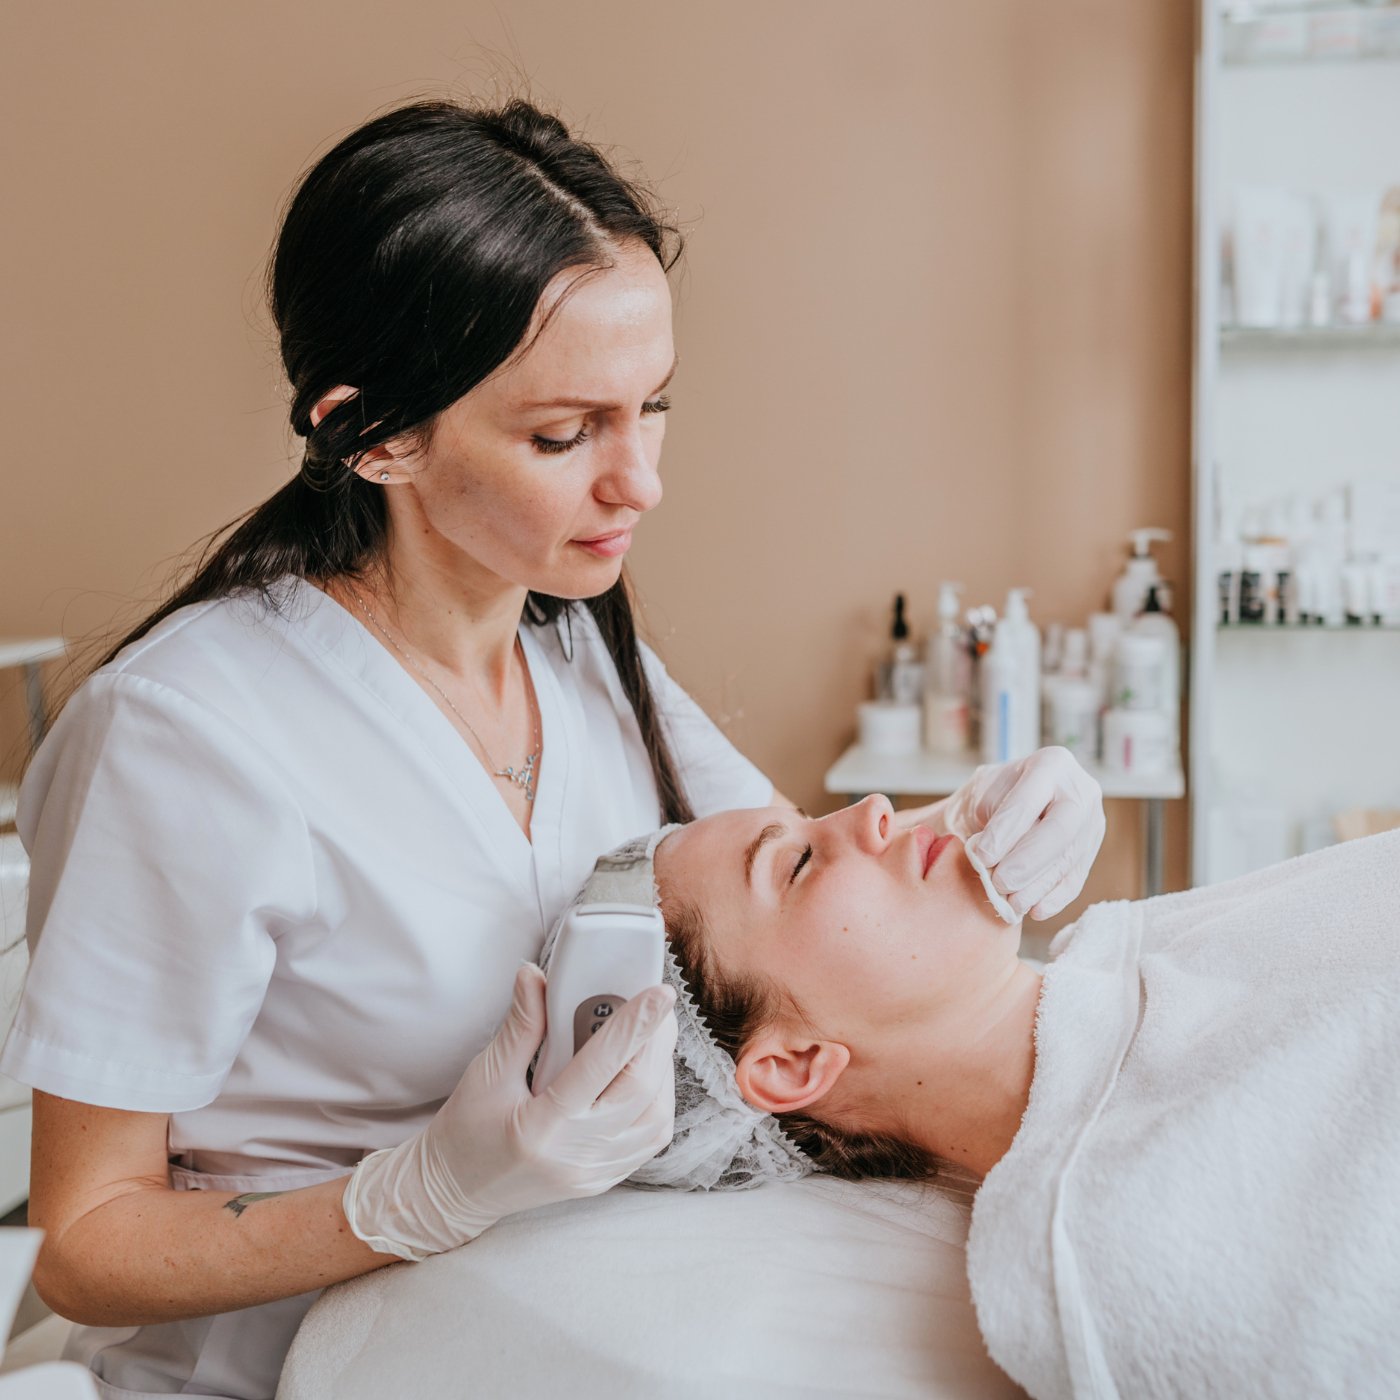 Things to Consider When Choosing a Light for Esthetician Services - The CosmoGlo